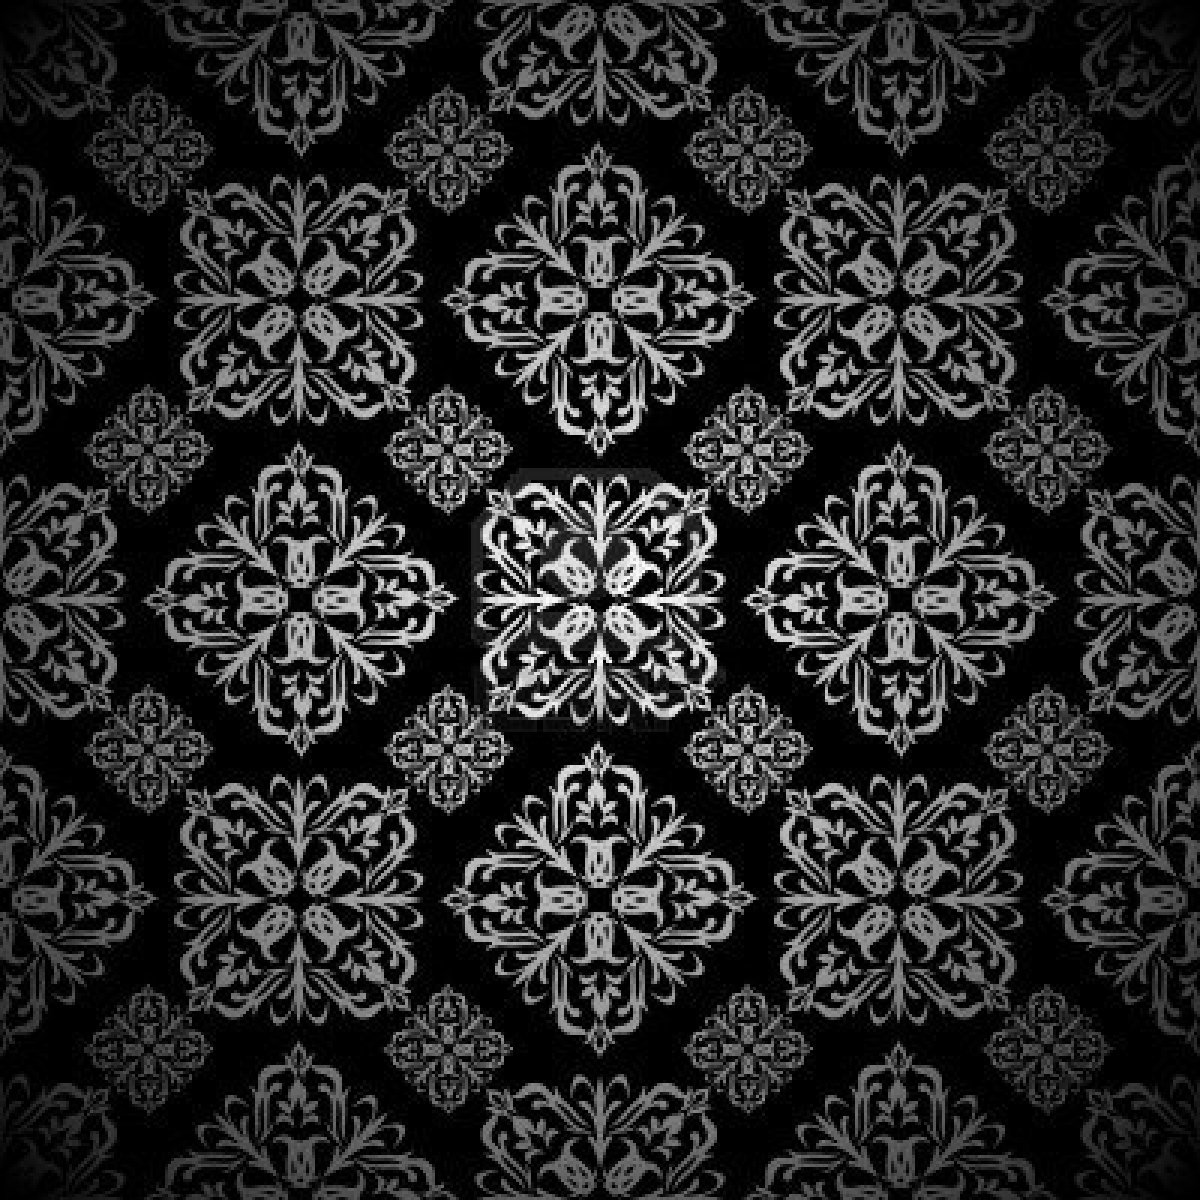   silver and black seamless tile background wallpaper pattern